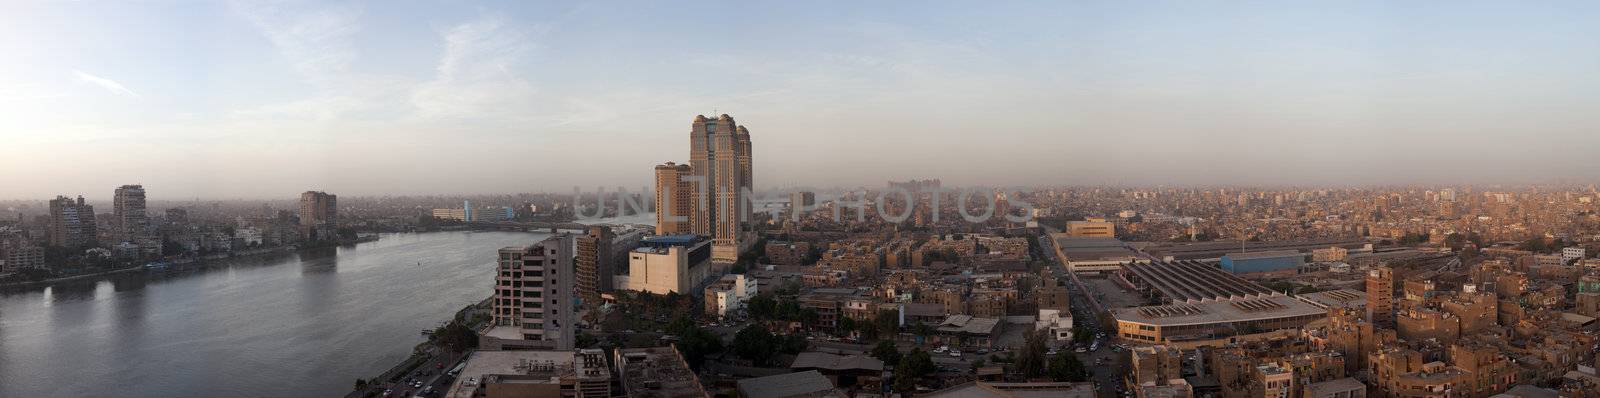 Smoggy evening panorama across Cairo in Egypt with the river Nile